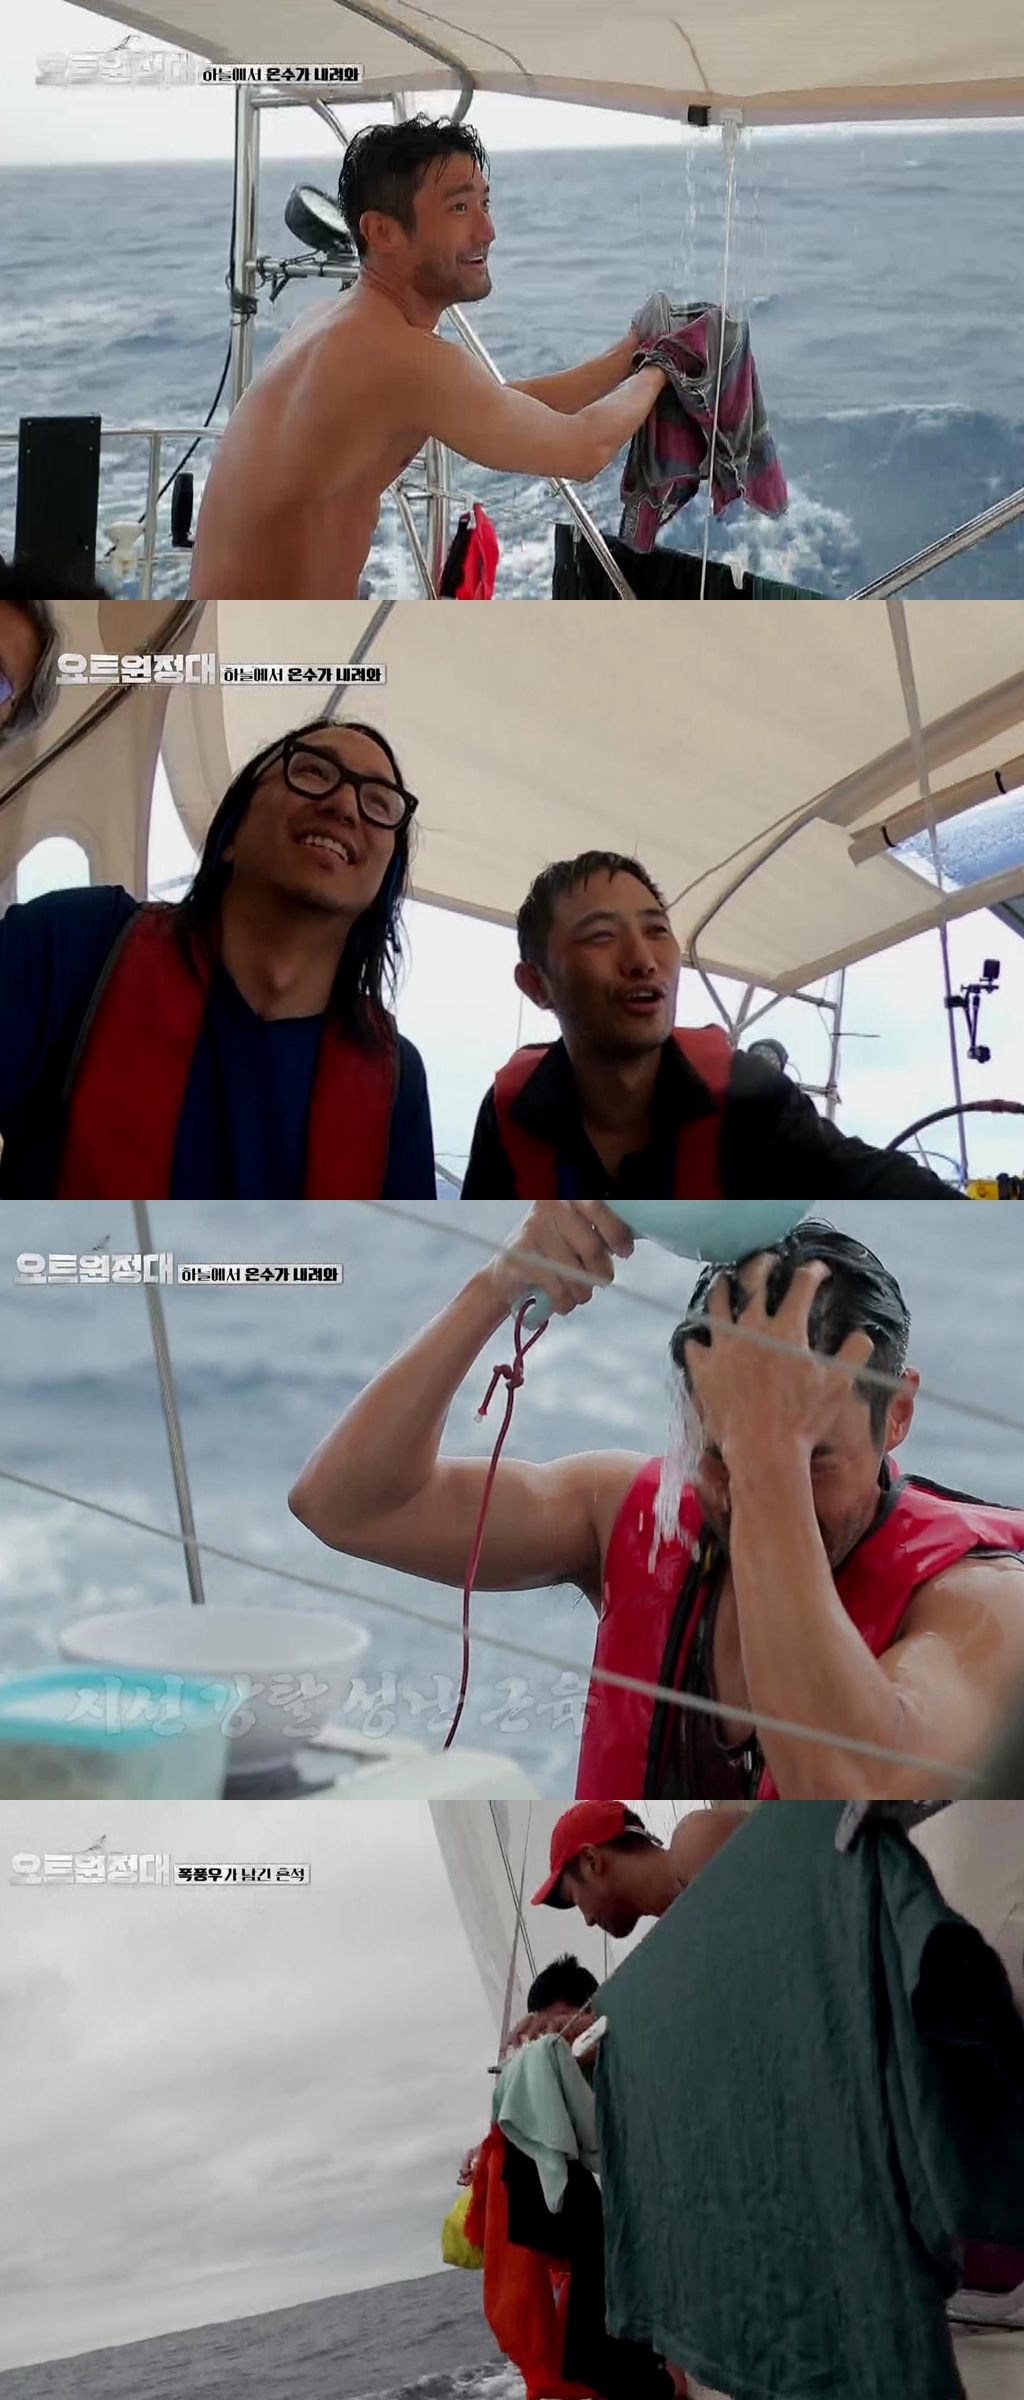 Secure with Yot Expedition Rainwater, shower, laundry, and wise yacht life unfolds.MBC Everlons Yacht Expedition, which will be broadcast on the 28th, depicts Jin Goo - Choi Siwon - Chang Kiha - Song Ho-joon, who decides to return to the sea with shock and fear behind him, and moves toward a new voyage.After the storm, the peace of peace that has been visited for a long time will be unfolded.The yacht expedition, which had been in the Pacific Ocean survival period against strong winds, made a difficult decision to return in the crisis, but it is looking for another voyage in the process of returning.In the meantime, the members of the crew who are engaged in a wise yacht life are foreseeing their curiosity.The crew who suddenly experienced the Tamsui Station situation where tap water fell suddenly overcame the sudden situation with a sparkling idea.Jin Goo handed a bucket of Rainwater to Choi Siwon, who tried his first Rainwater Shower in a sudden Tamsui Station situation, and actively cooperated with the Shower.Choi Siwon, who is showing off his muscle and is showing off his show, is caught and attracts attention.In addition, Chang Kiha reportedly tried to wash the yacht by sprawling laundry on the yacht; Chang Kiha is said to have been satisfied with the perfect Rainwater washing course until rinsing.In addition, Jin Goo collected the falling Rainwater and said that he had the top model in the face wash.The appearance of the Yot Expedition members who utilize Rainwater creates a different scene and focuses attention on viewers.iMBC Baek A-young  Photos Provided MBC Everlon